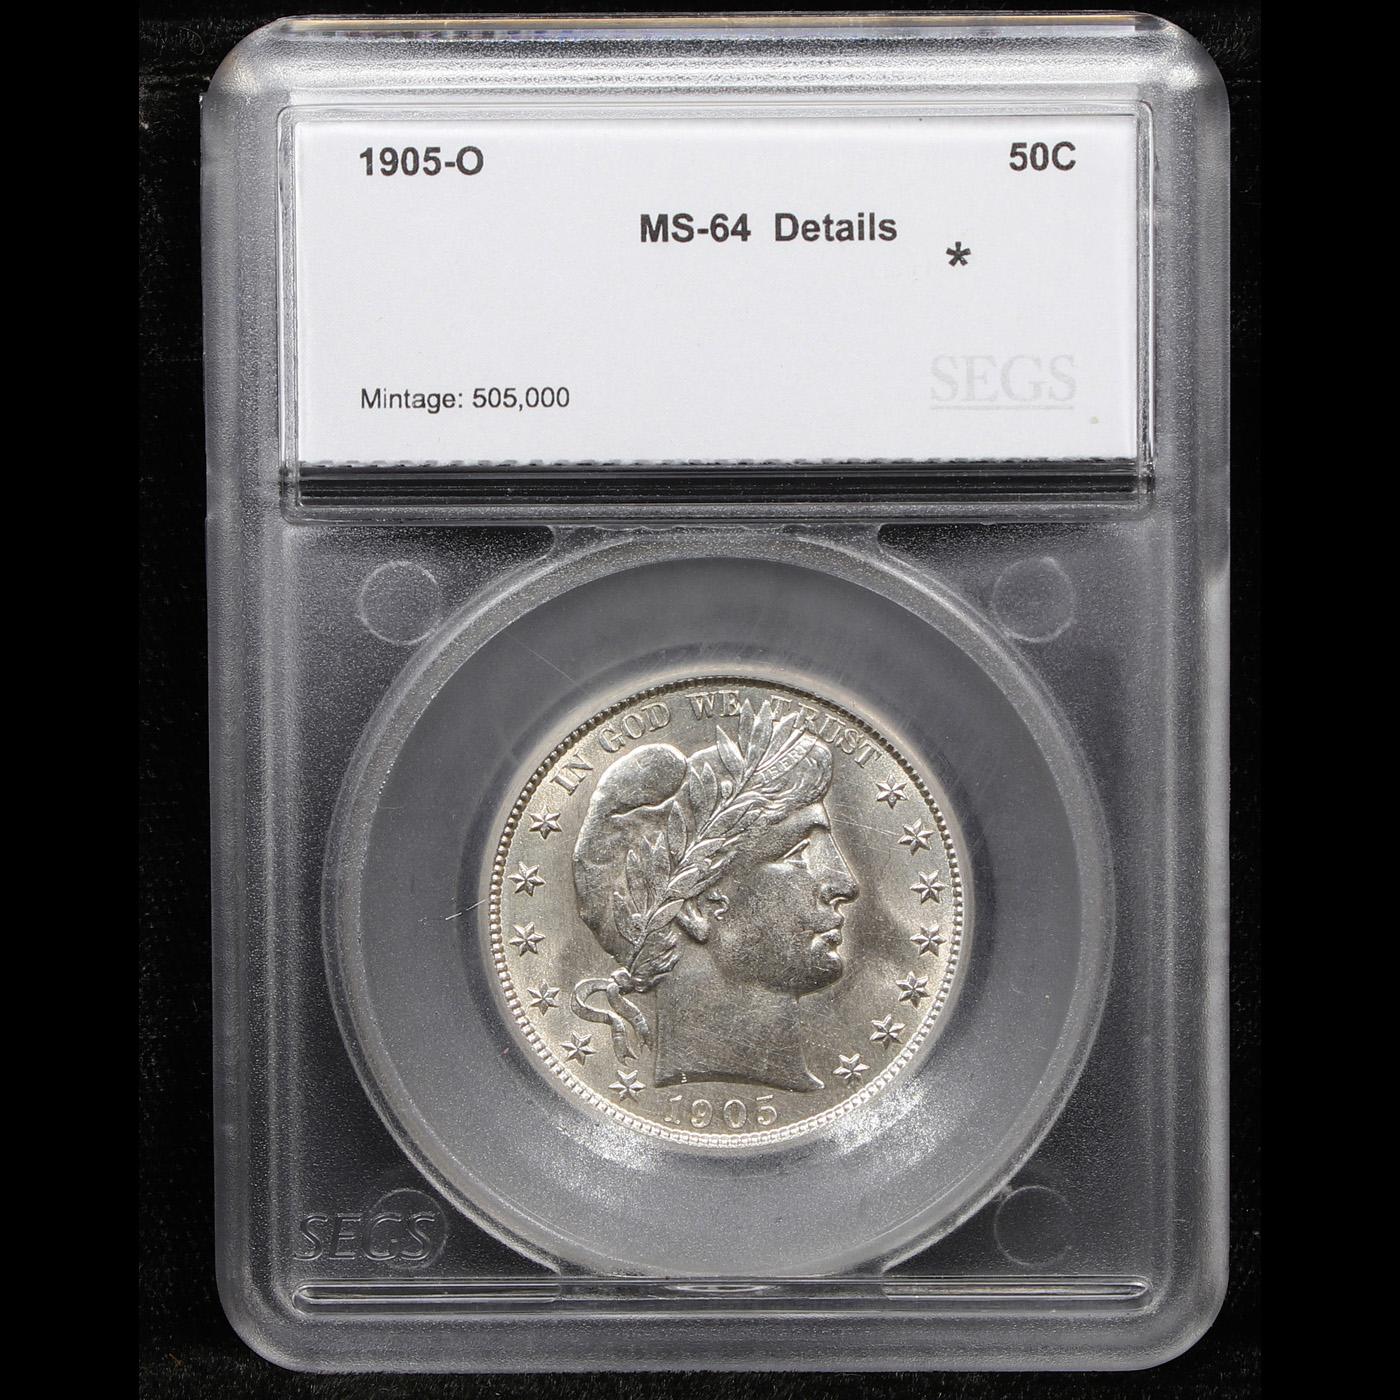 ***Auction Highlight*** 1905-o Barber Half Dollars 50c Graded ms64 details By SEGS (fc)